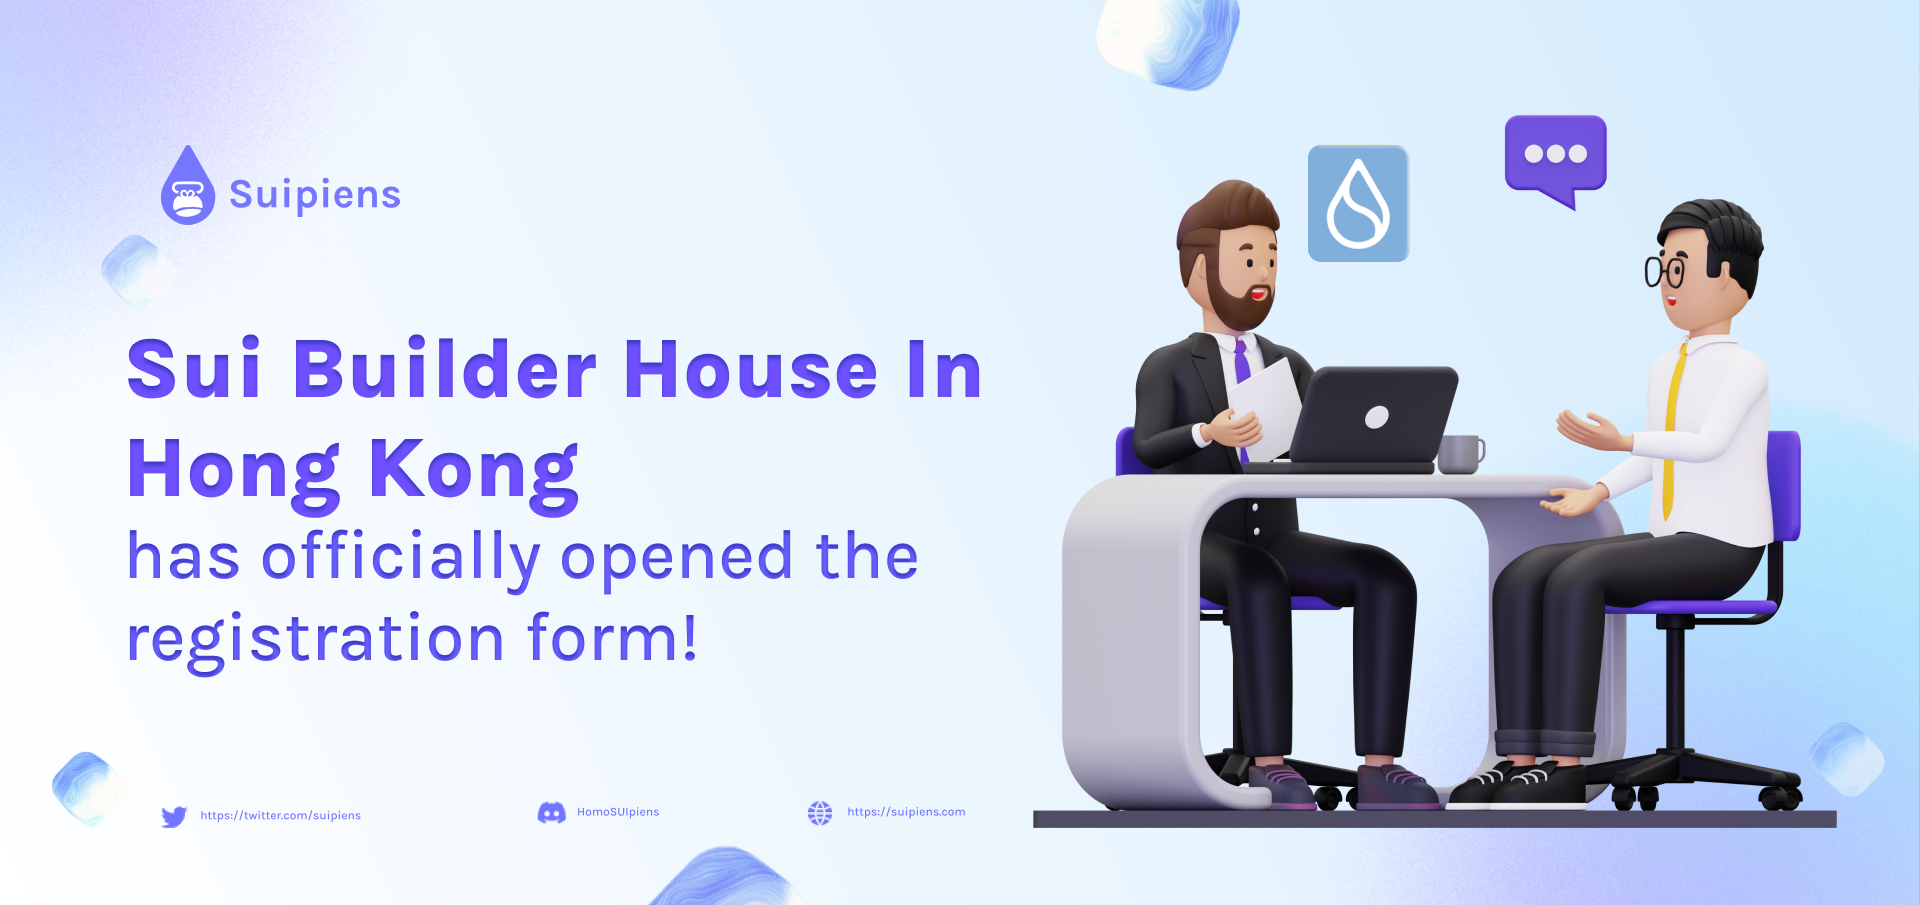 Sui Builder House In Hong Kong has officially opened the registration form!